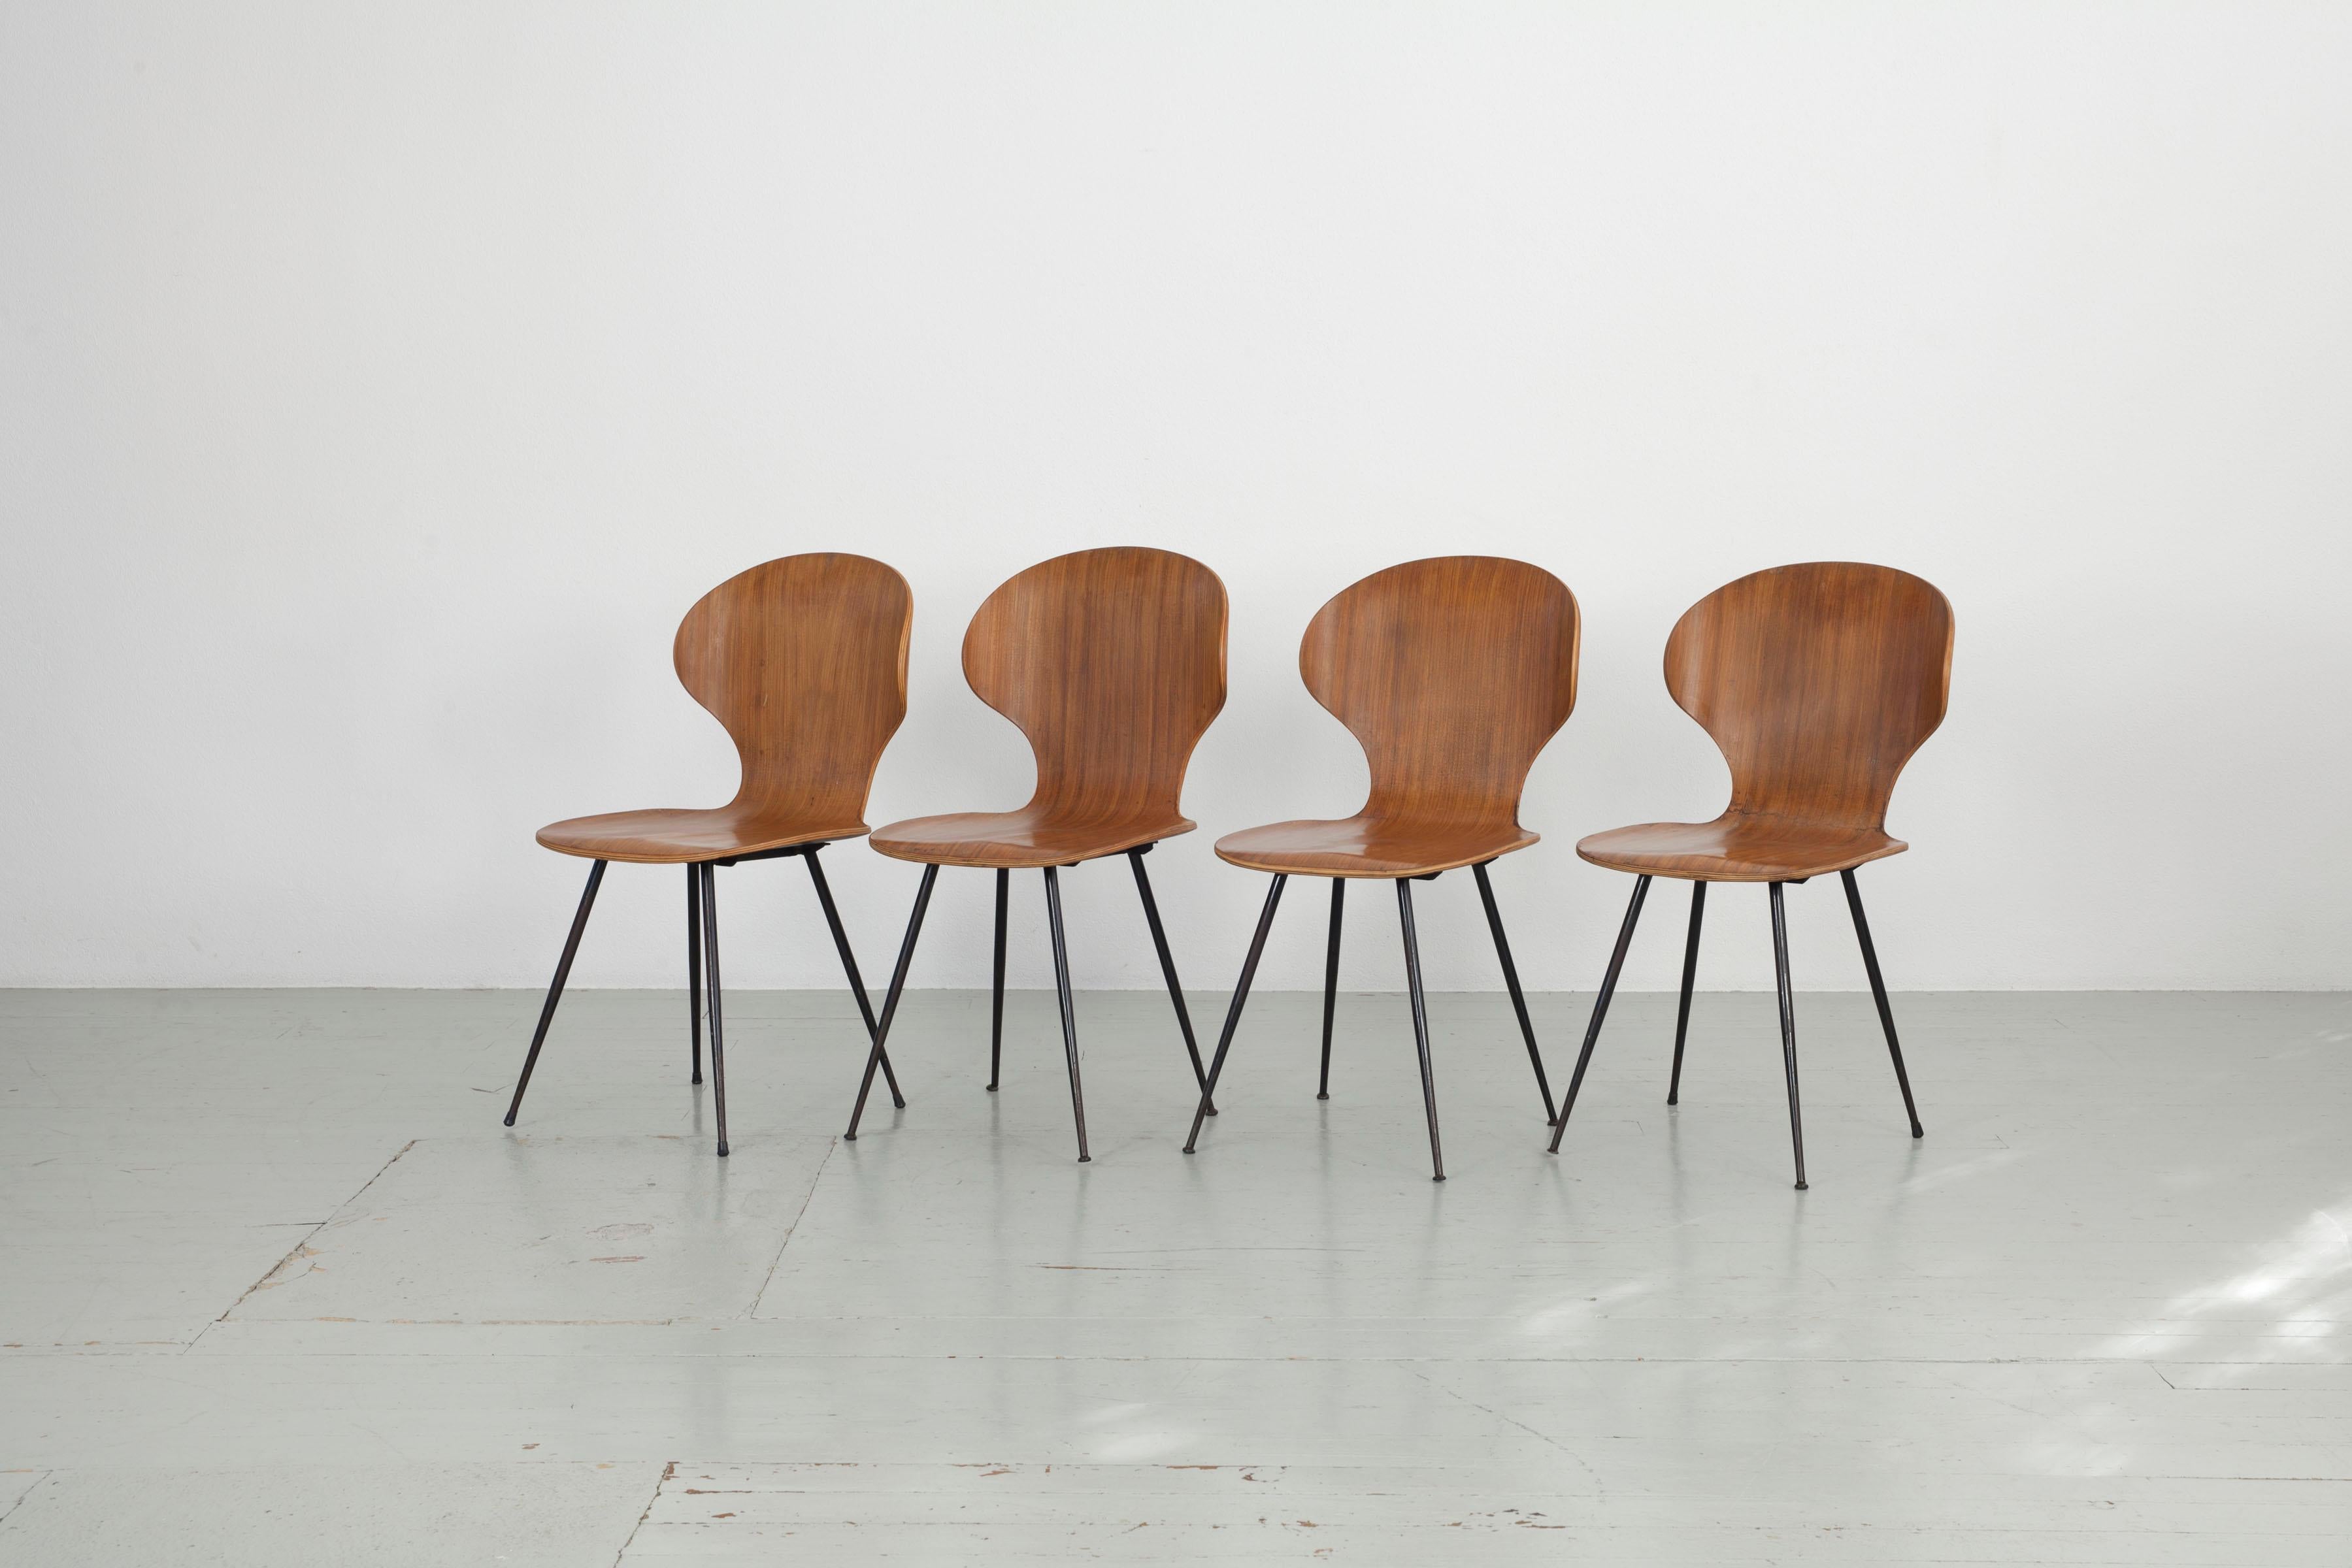 Set of 4 Bentwood chairs by Carlo Ratti, Industria Legni Curvati, Italy  1950s. For Sale 1